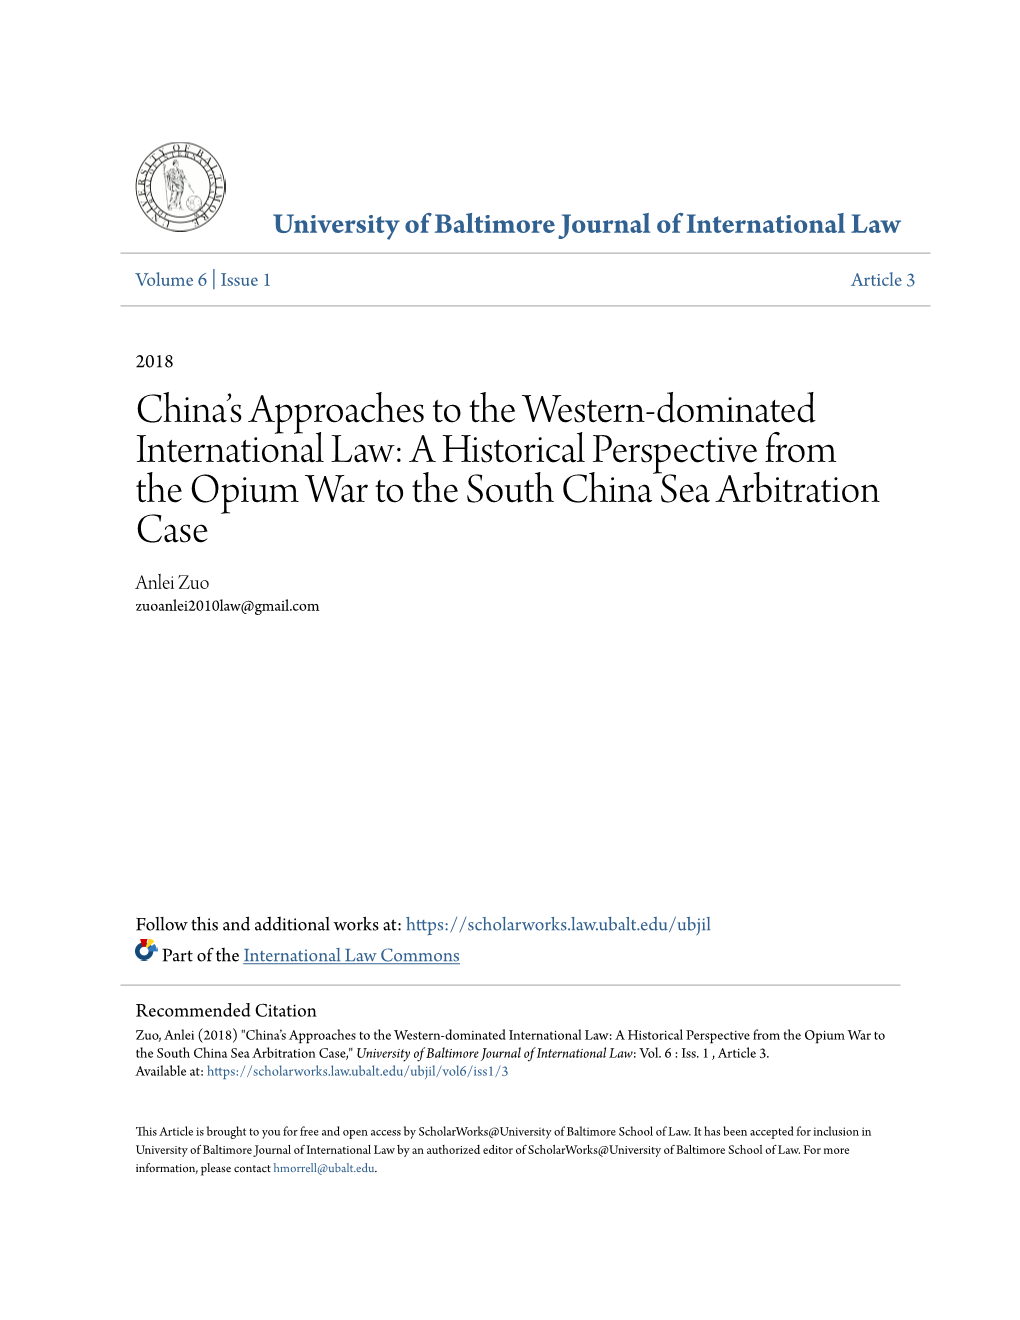 A Historical Perspective from the Opium War to the South China Sea Arbitration Case Anlei Zuo Zuoanlei2010law@Gmail.Com